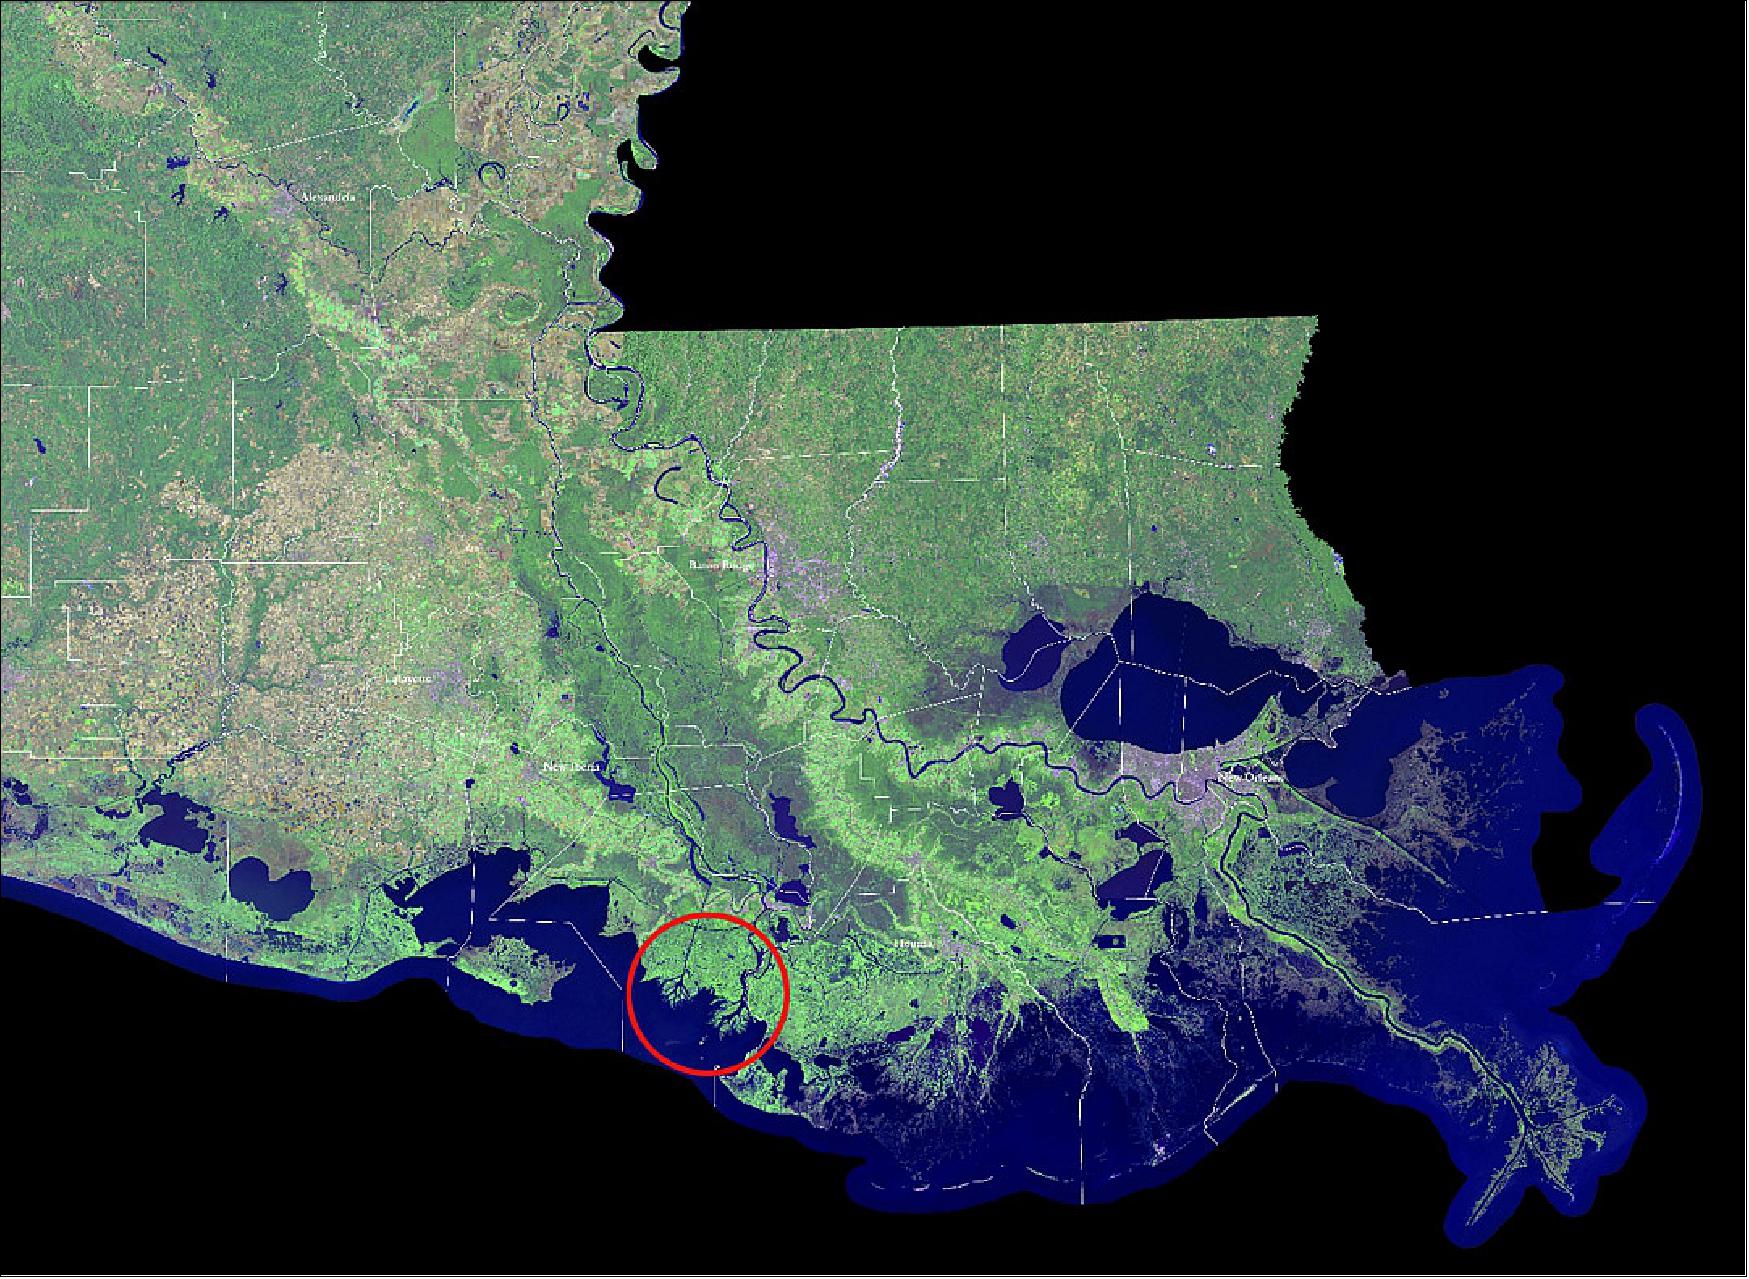 Figure 42: Satellite view of the Louisiana coastline with the studied areas of the Atchafalaya River Delta and Wax Lake Outlet, circled in red. The Mississippi River is the long meandering blue line, farthest right (east), image credit: USGS, NASA)